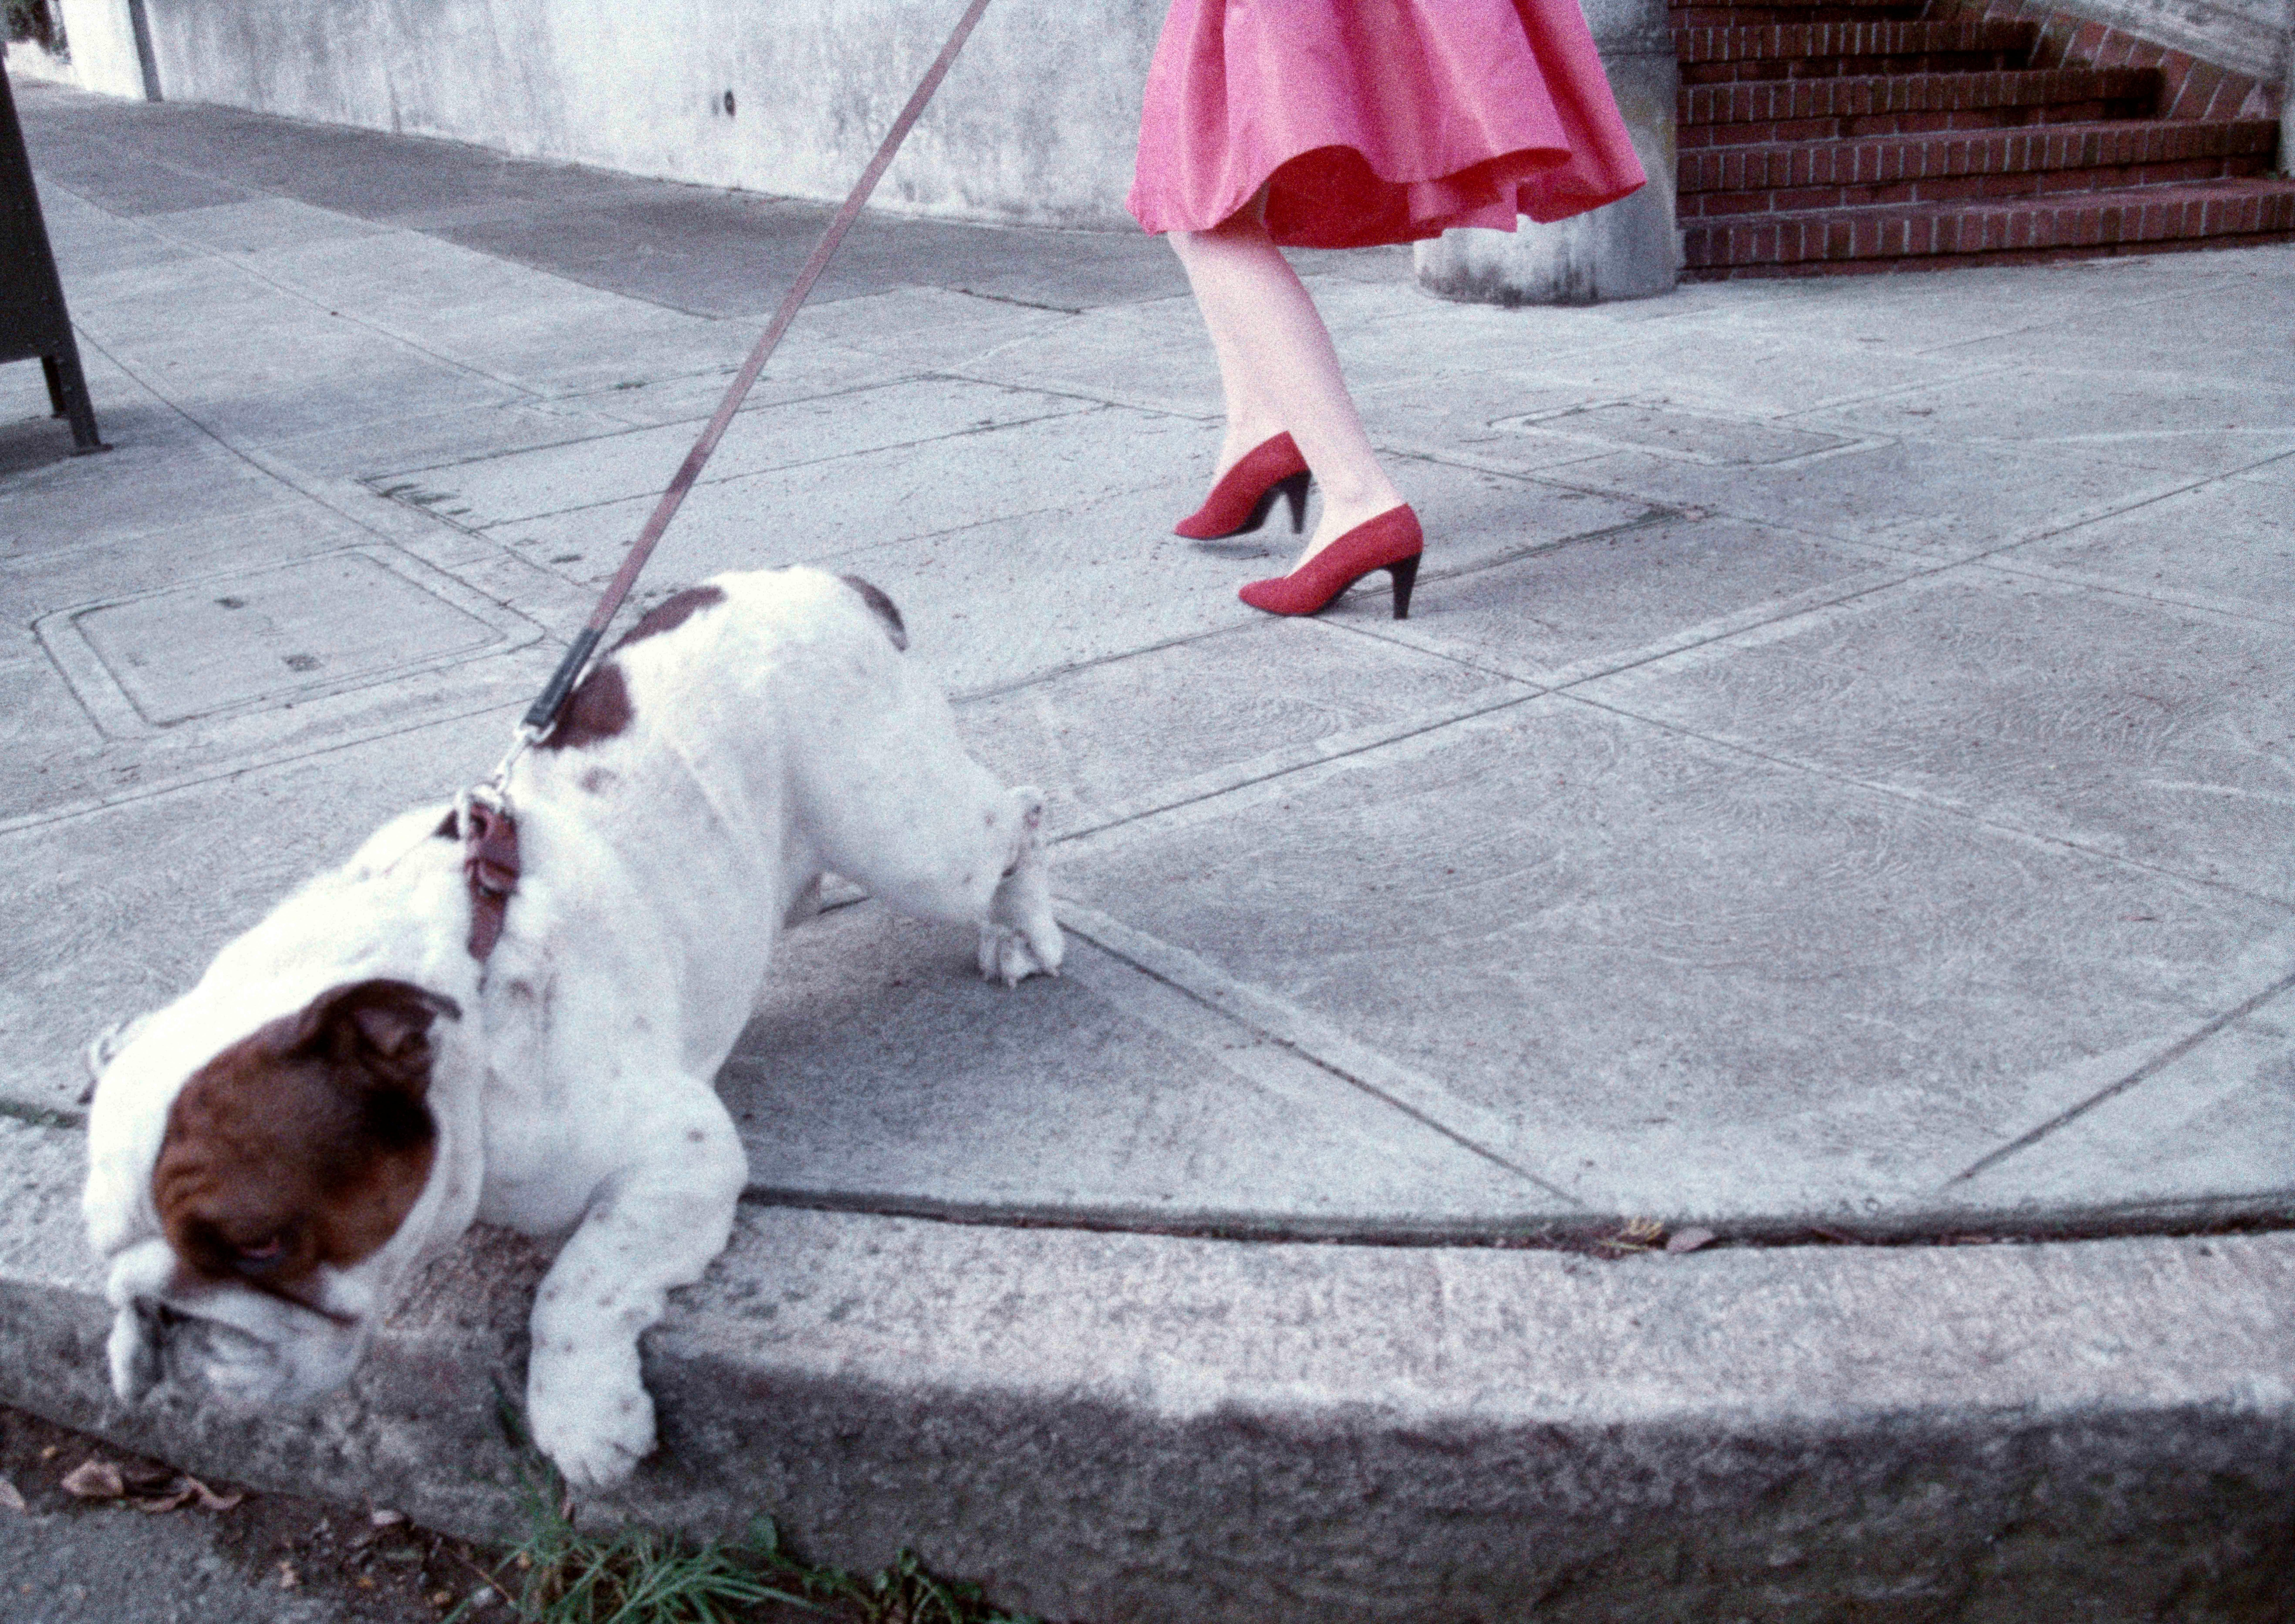 Robert Farber, Red Shoes and a Bulldog